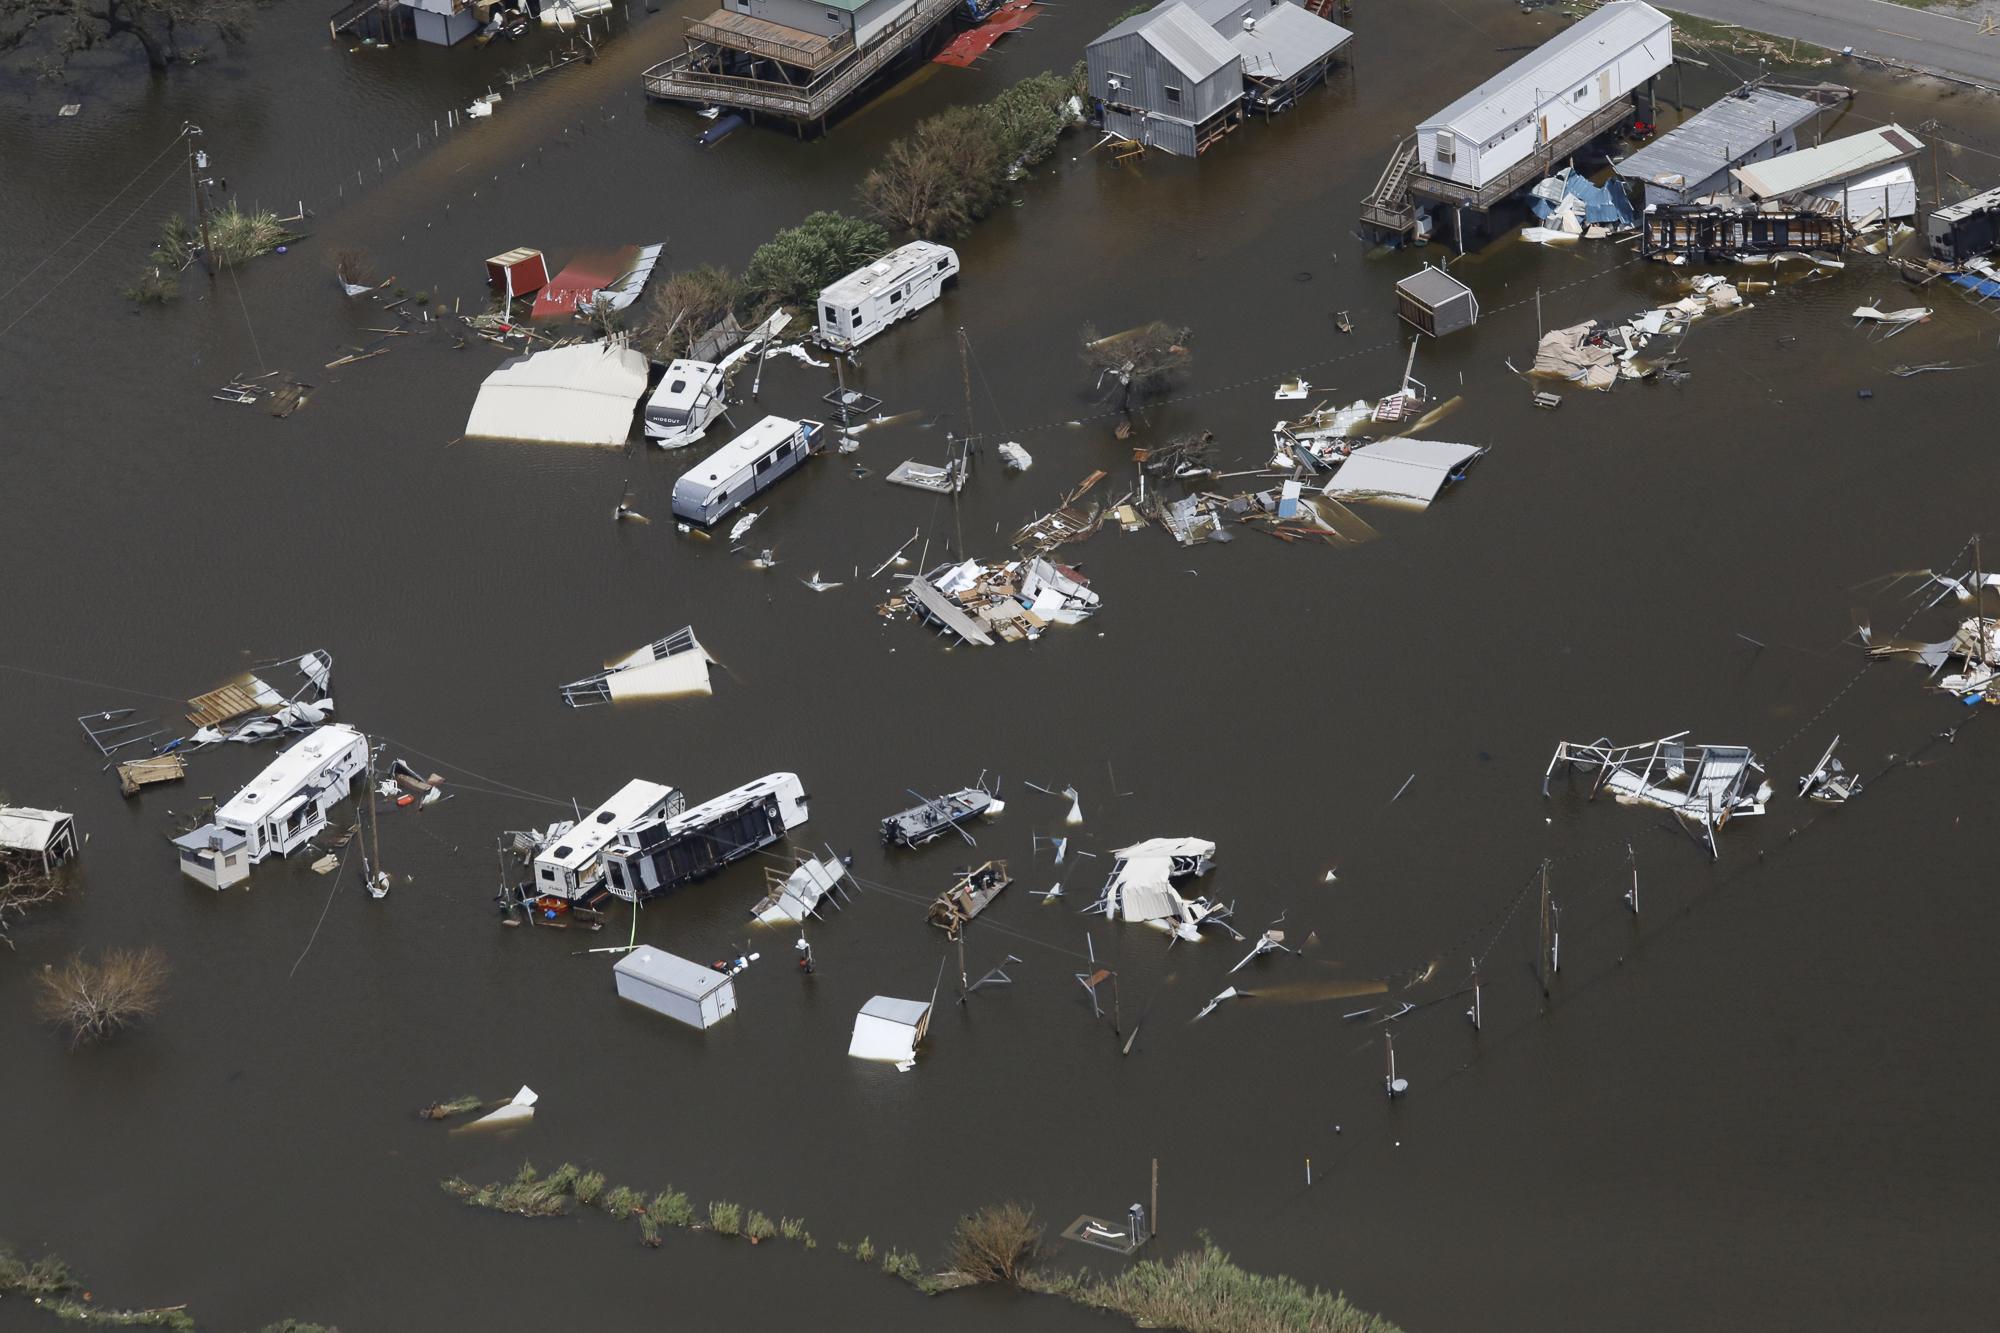 Hurricane Ida in Louisiana - An aerial view shows destroyed houses in a flooded area...